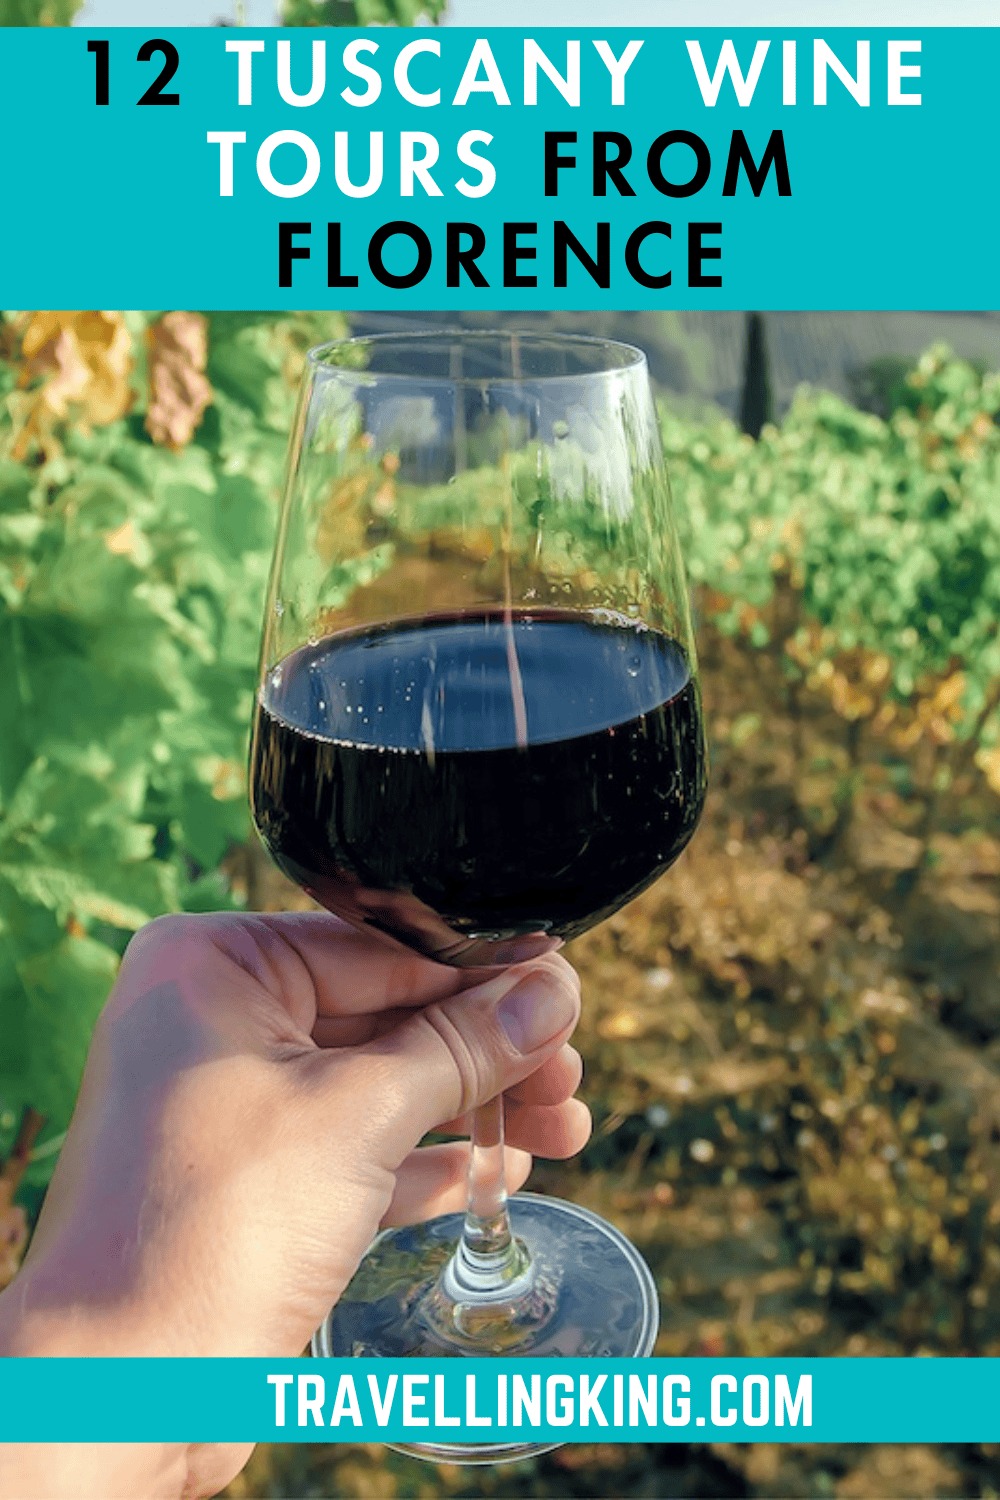 12 of the Best Tuscany Wine Tours from Florence